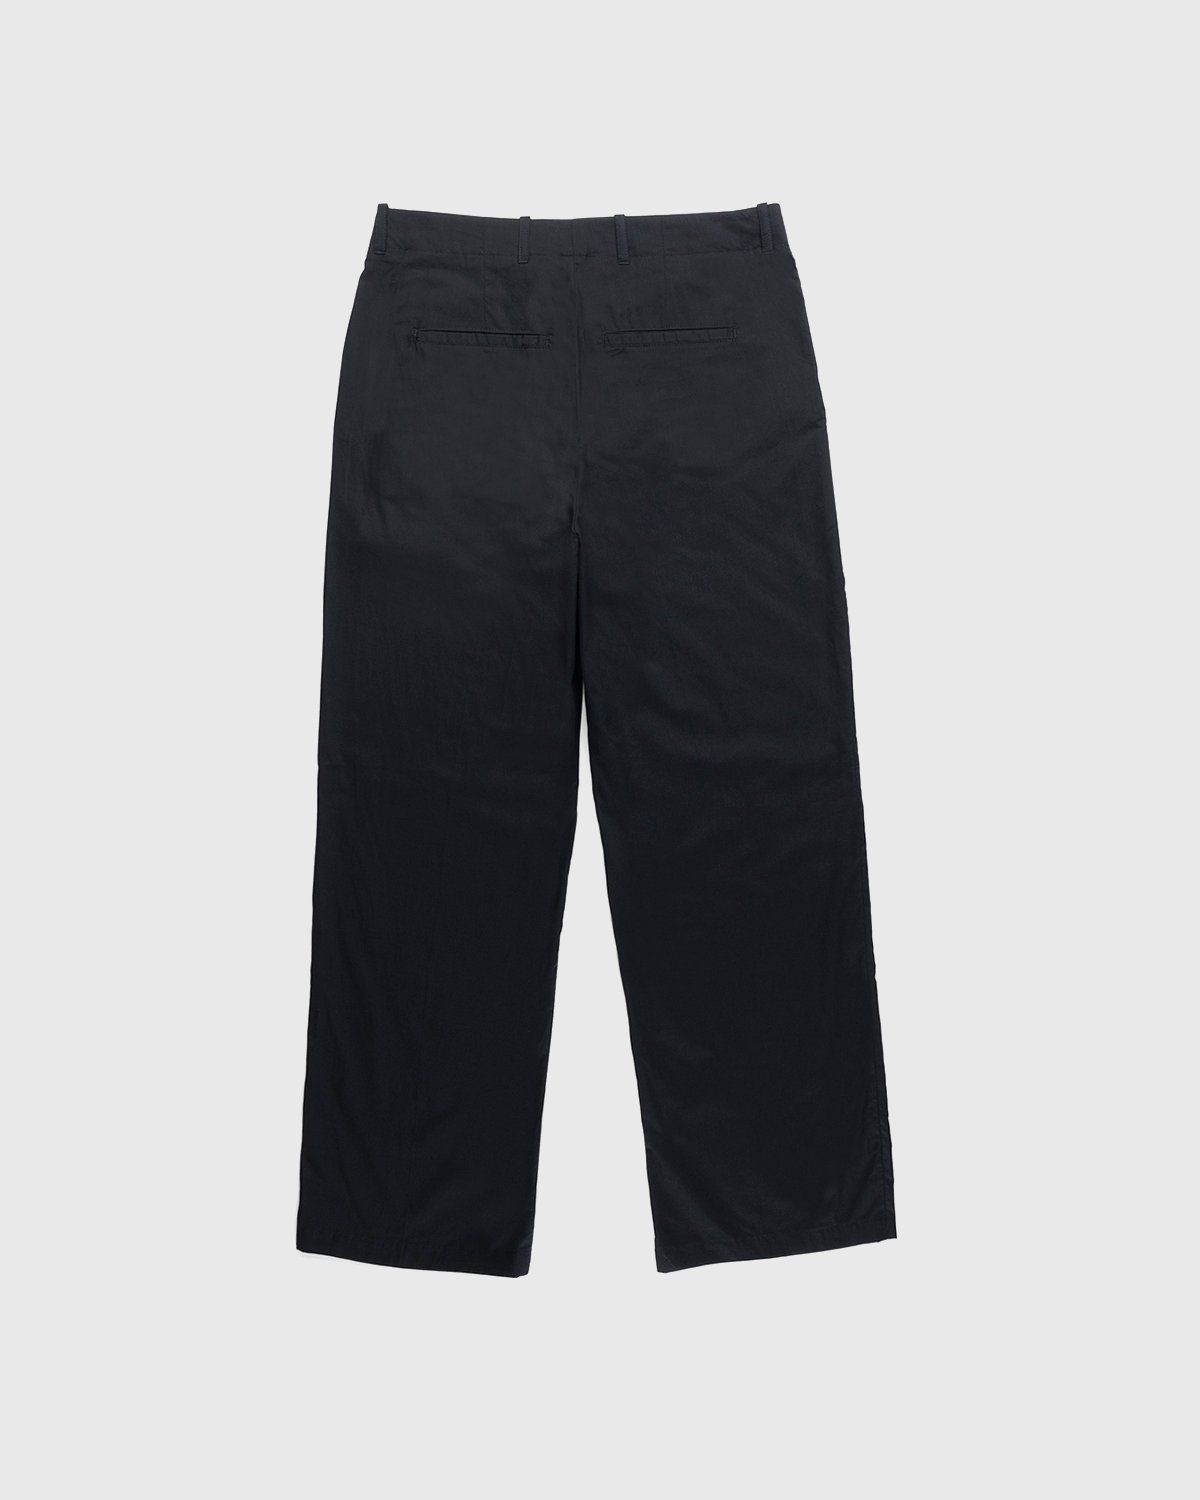 Our Legacy – Borrowed Chino Black Voile - Chinos - Black - Image 2